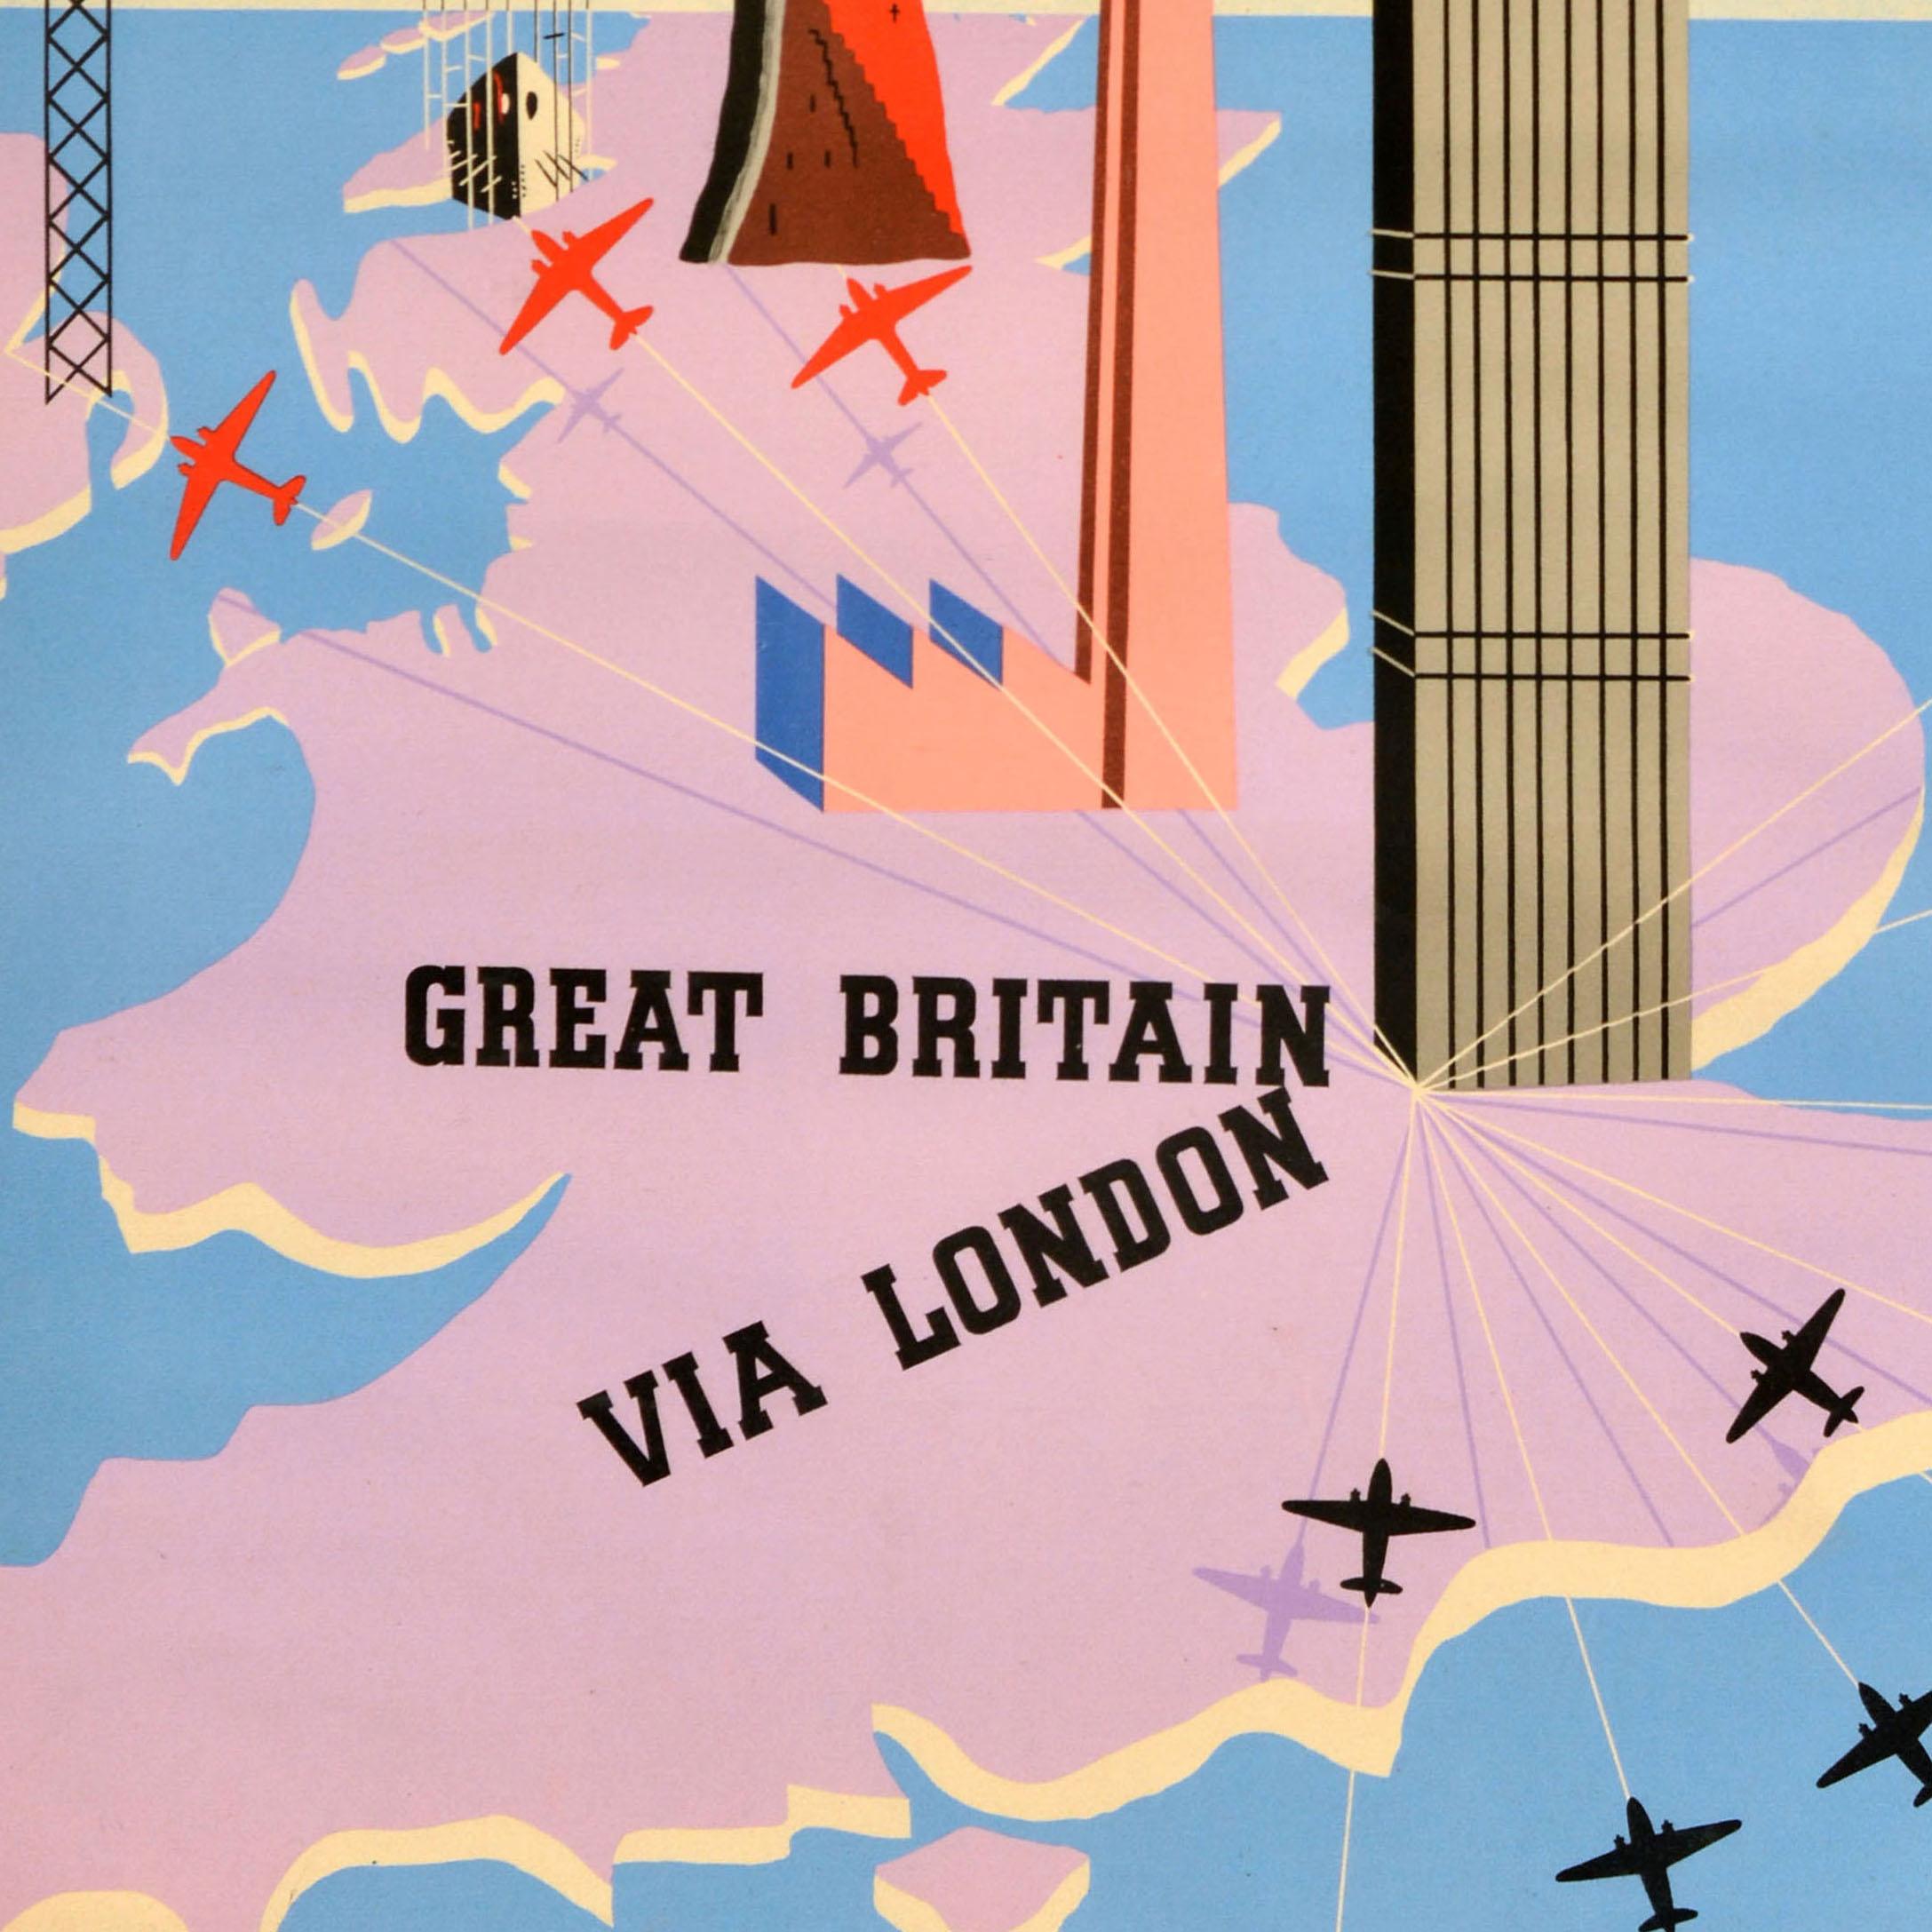 Original vintage mid-century design travel advertising poster for British European Airways - BEA Great Britain via London - featuring a map of Britain with images of various historic and notable landmarks including the Big Ben clock tower, a factory